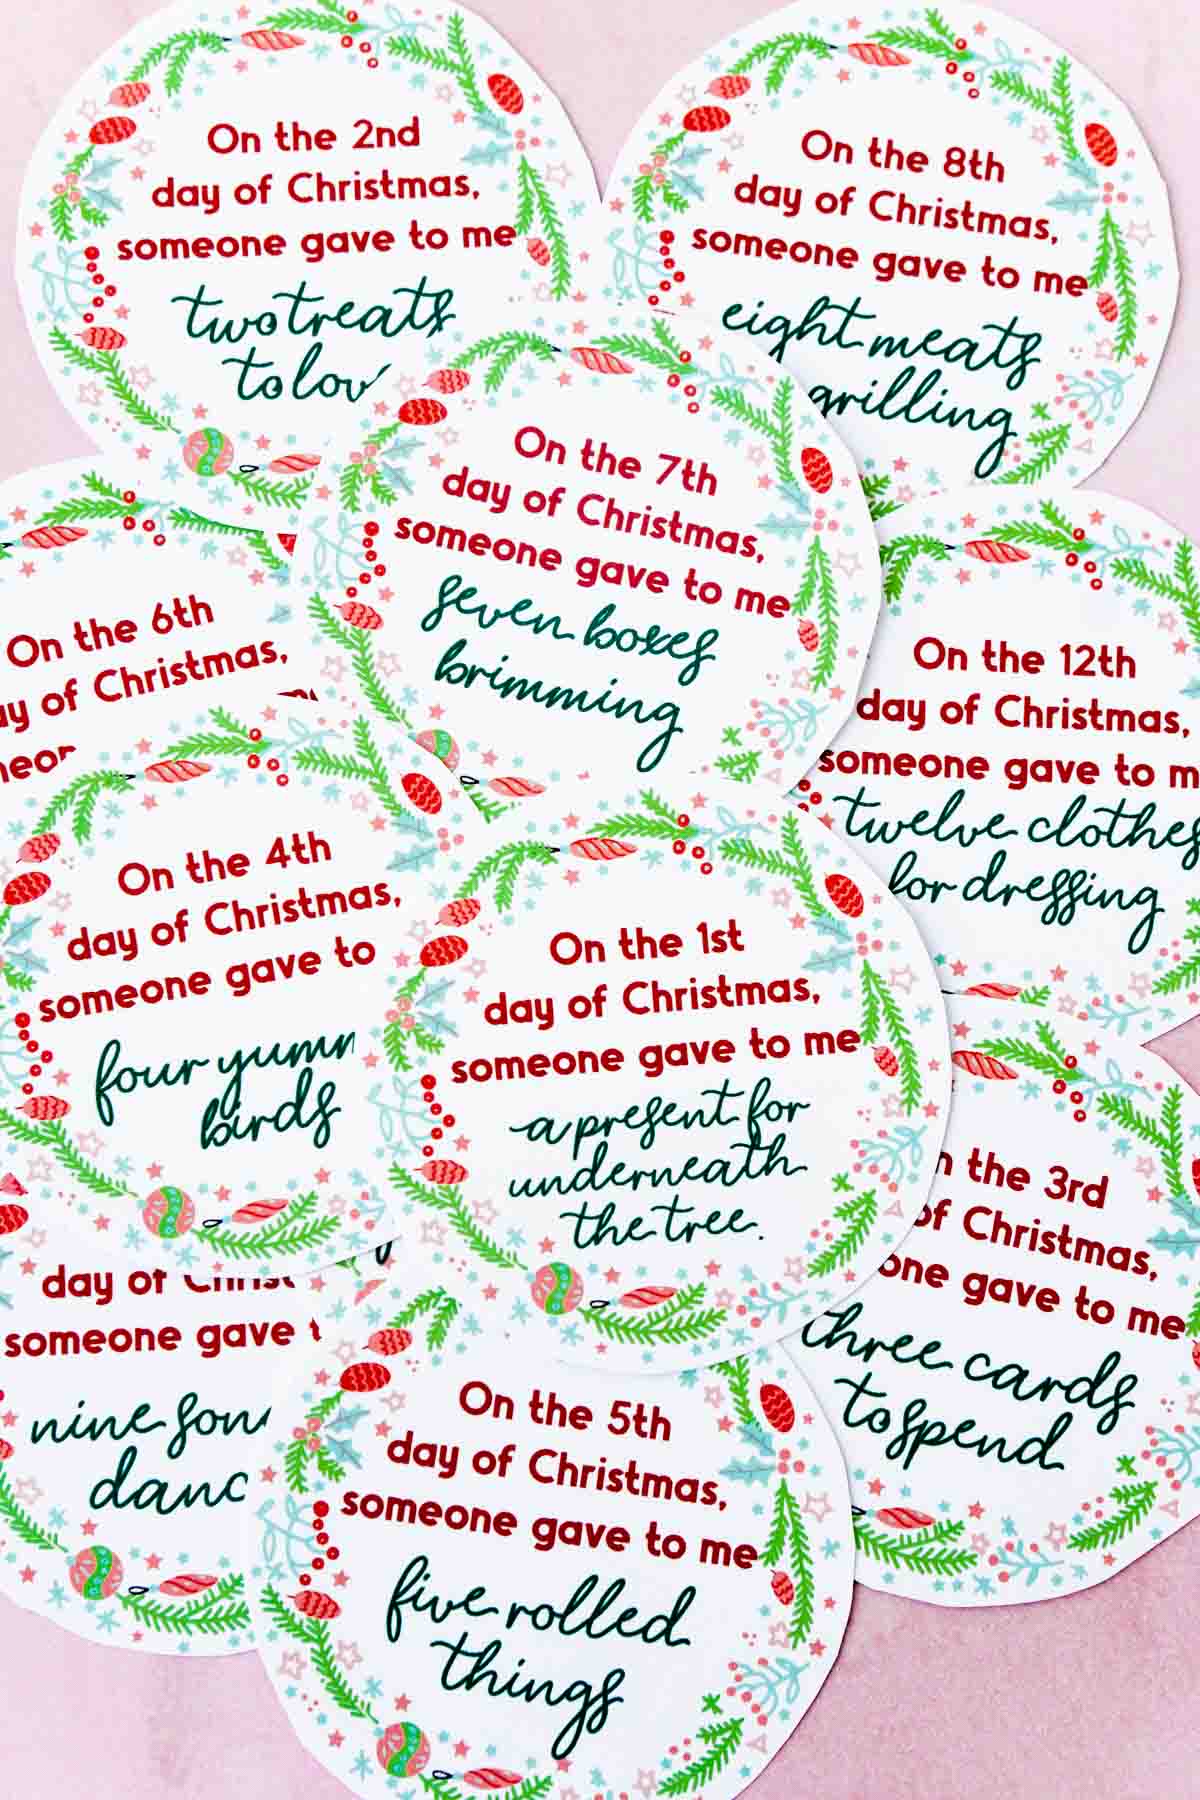 Creative 12 Days of Christmas Gifts   FREE Gift Tags - 26